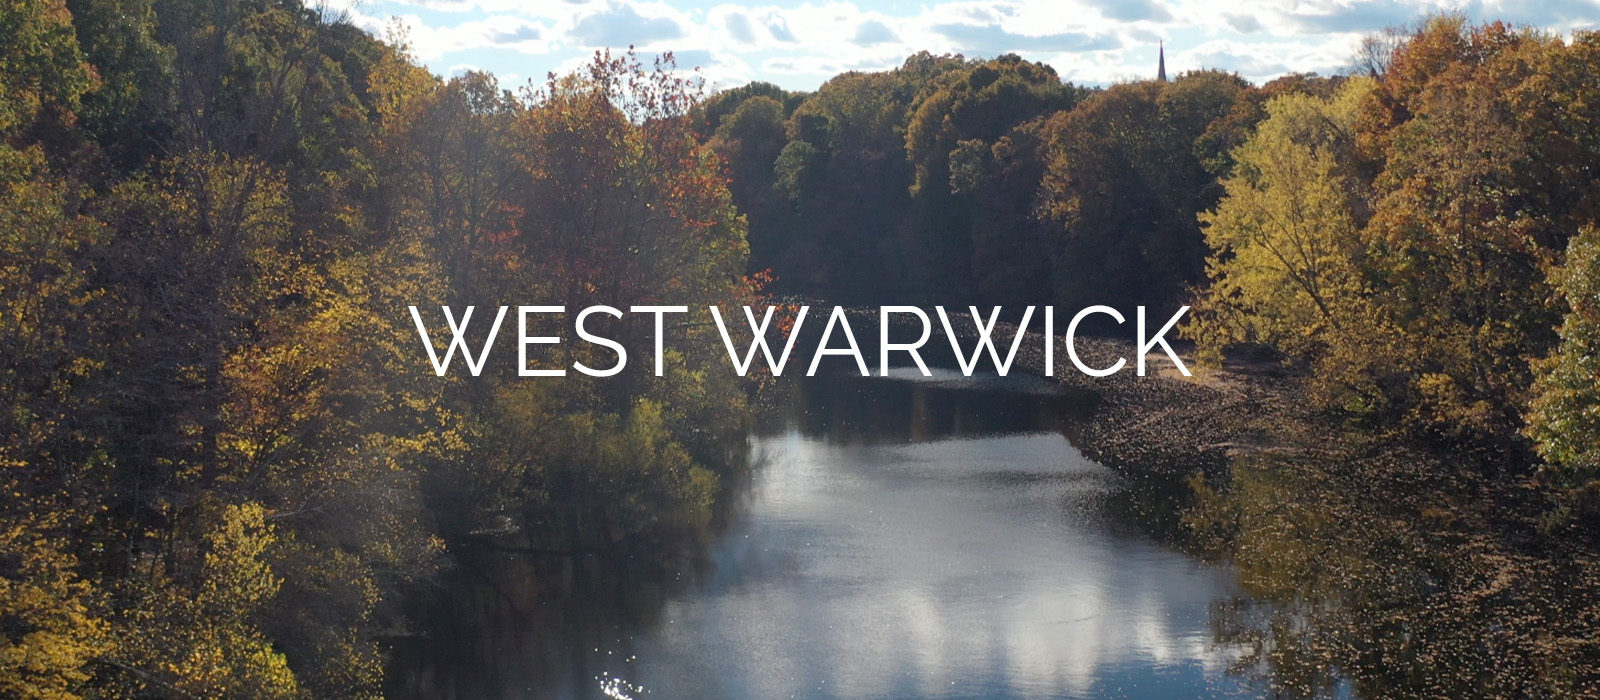 RISE Real Estate Consultants West Warwick City Guide